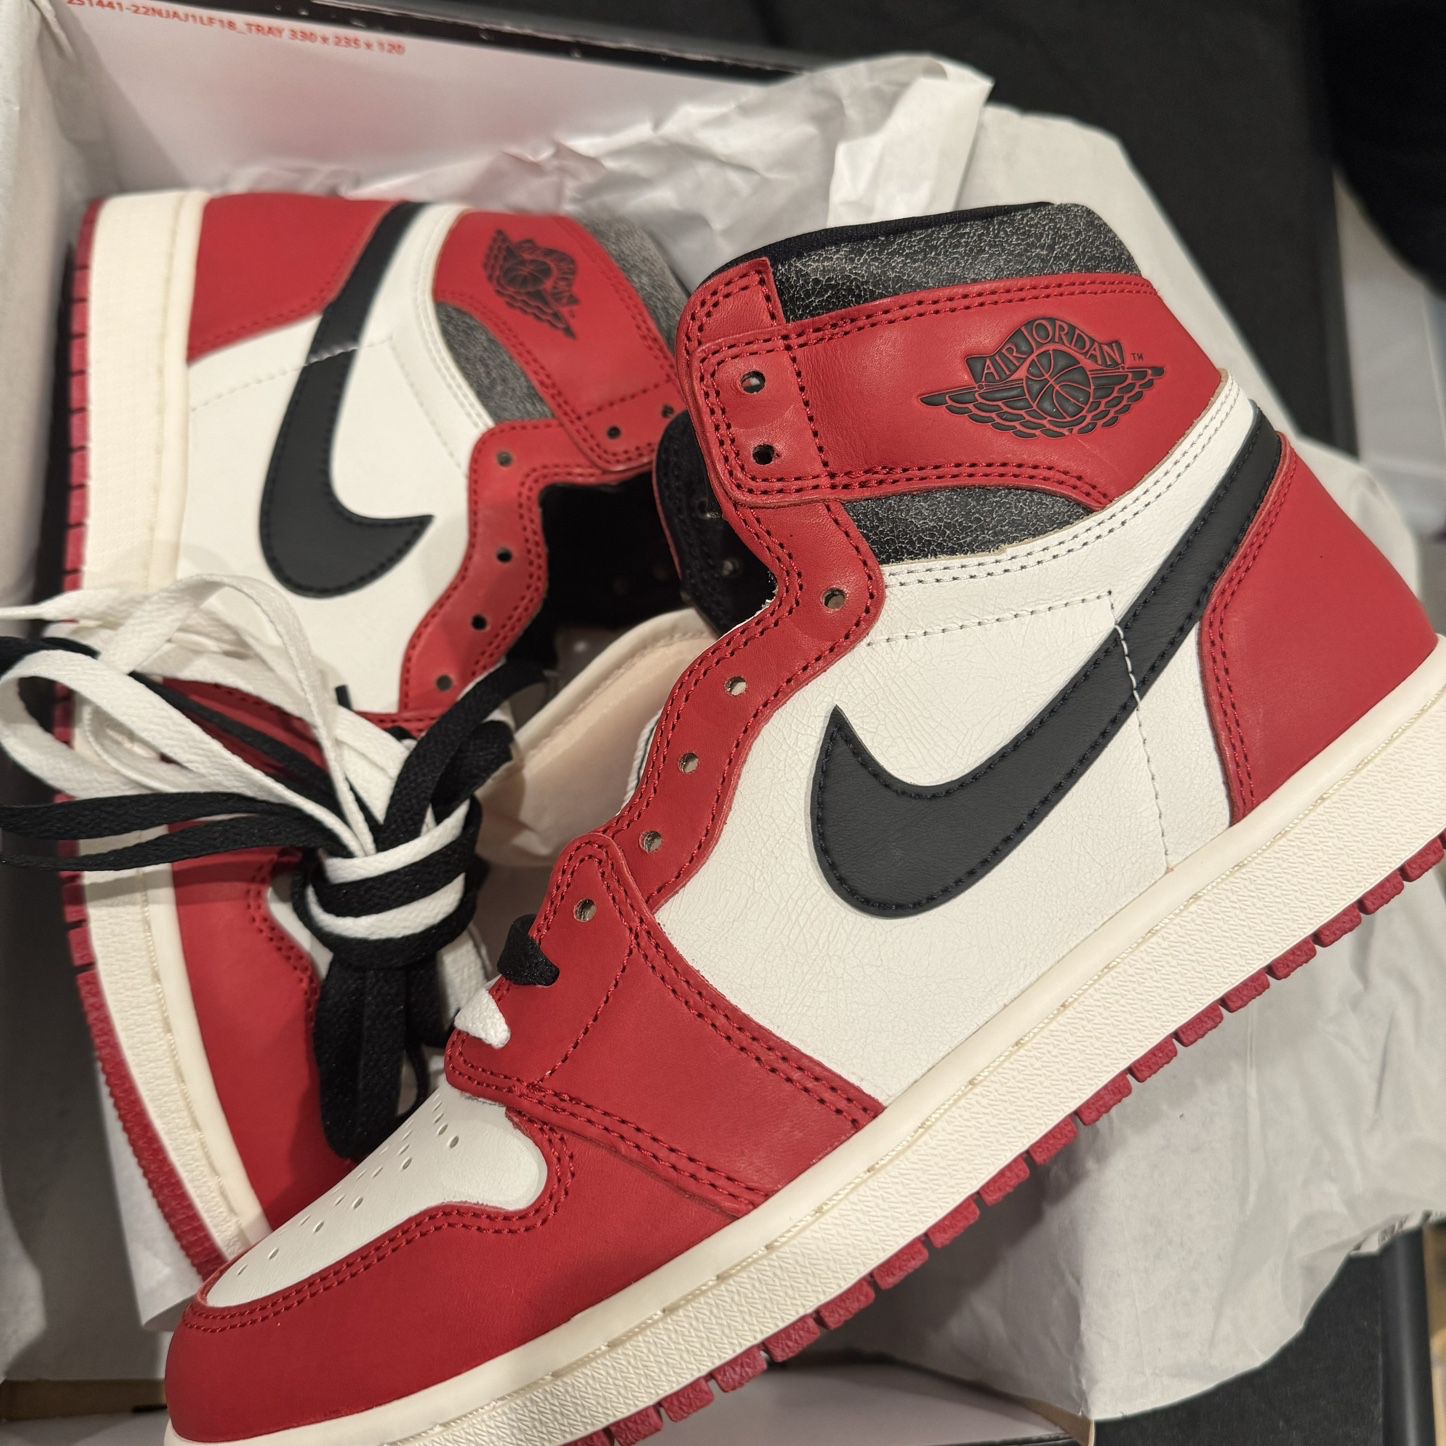 Nike Air Jordan 1 “Lost And Found” Chicago Size 10